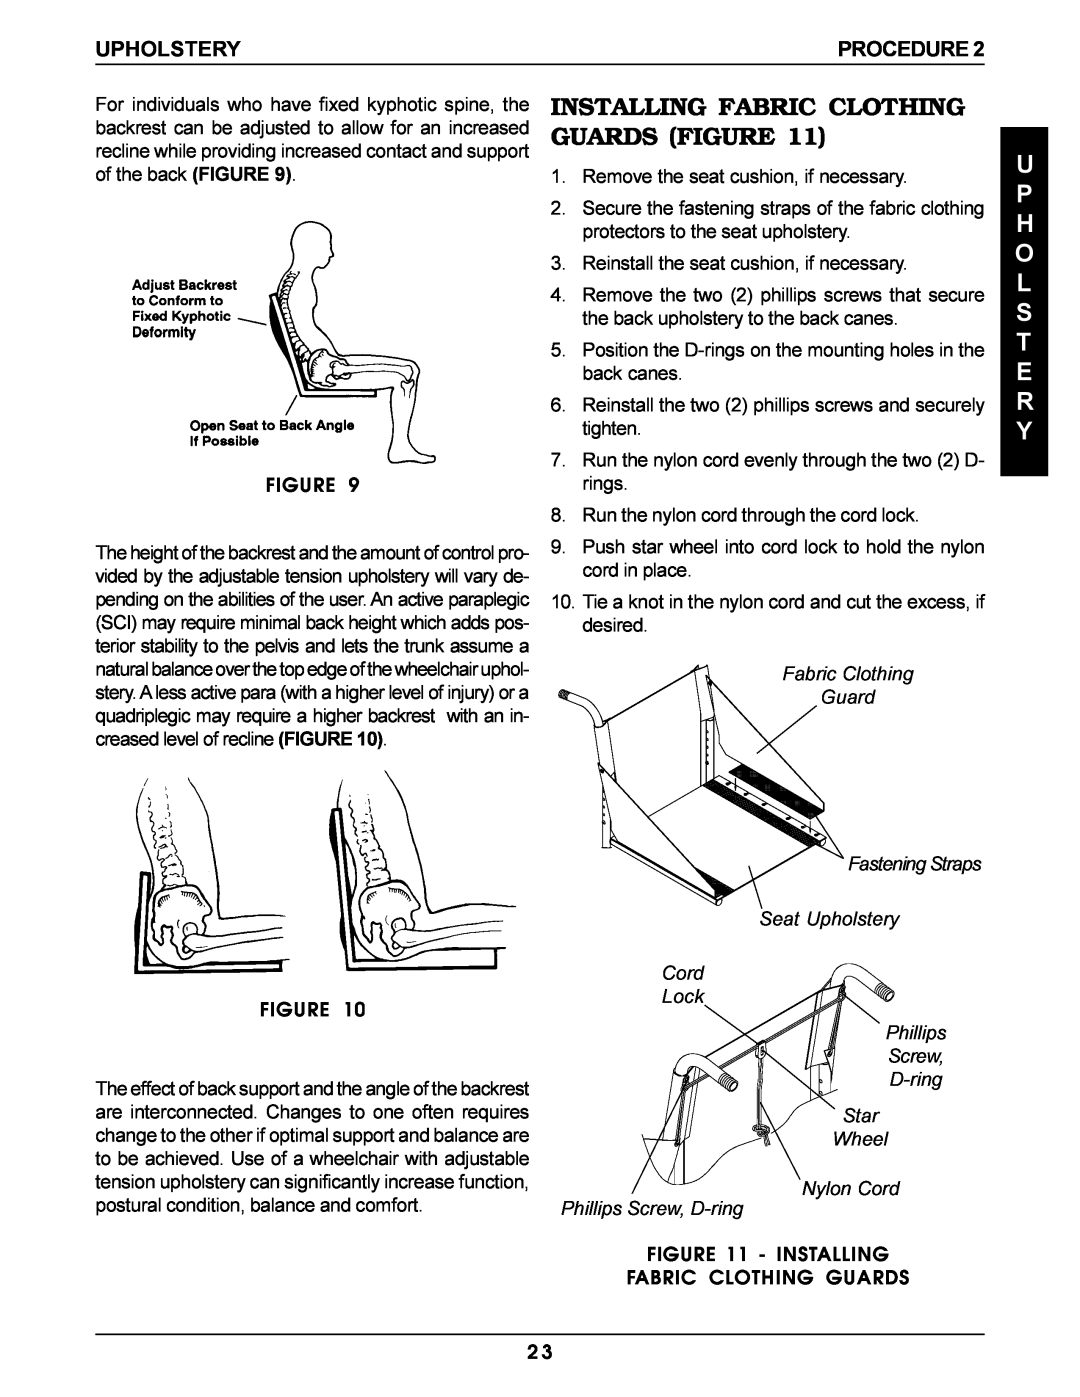 Invacare Pro Series manual Installing Fabric Clothing Guards Figure, U P H O L S T E R Y, Upholstery, Procedure 